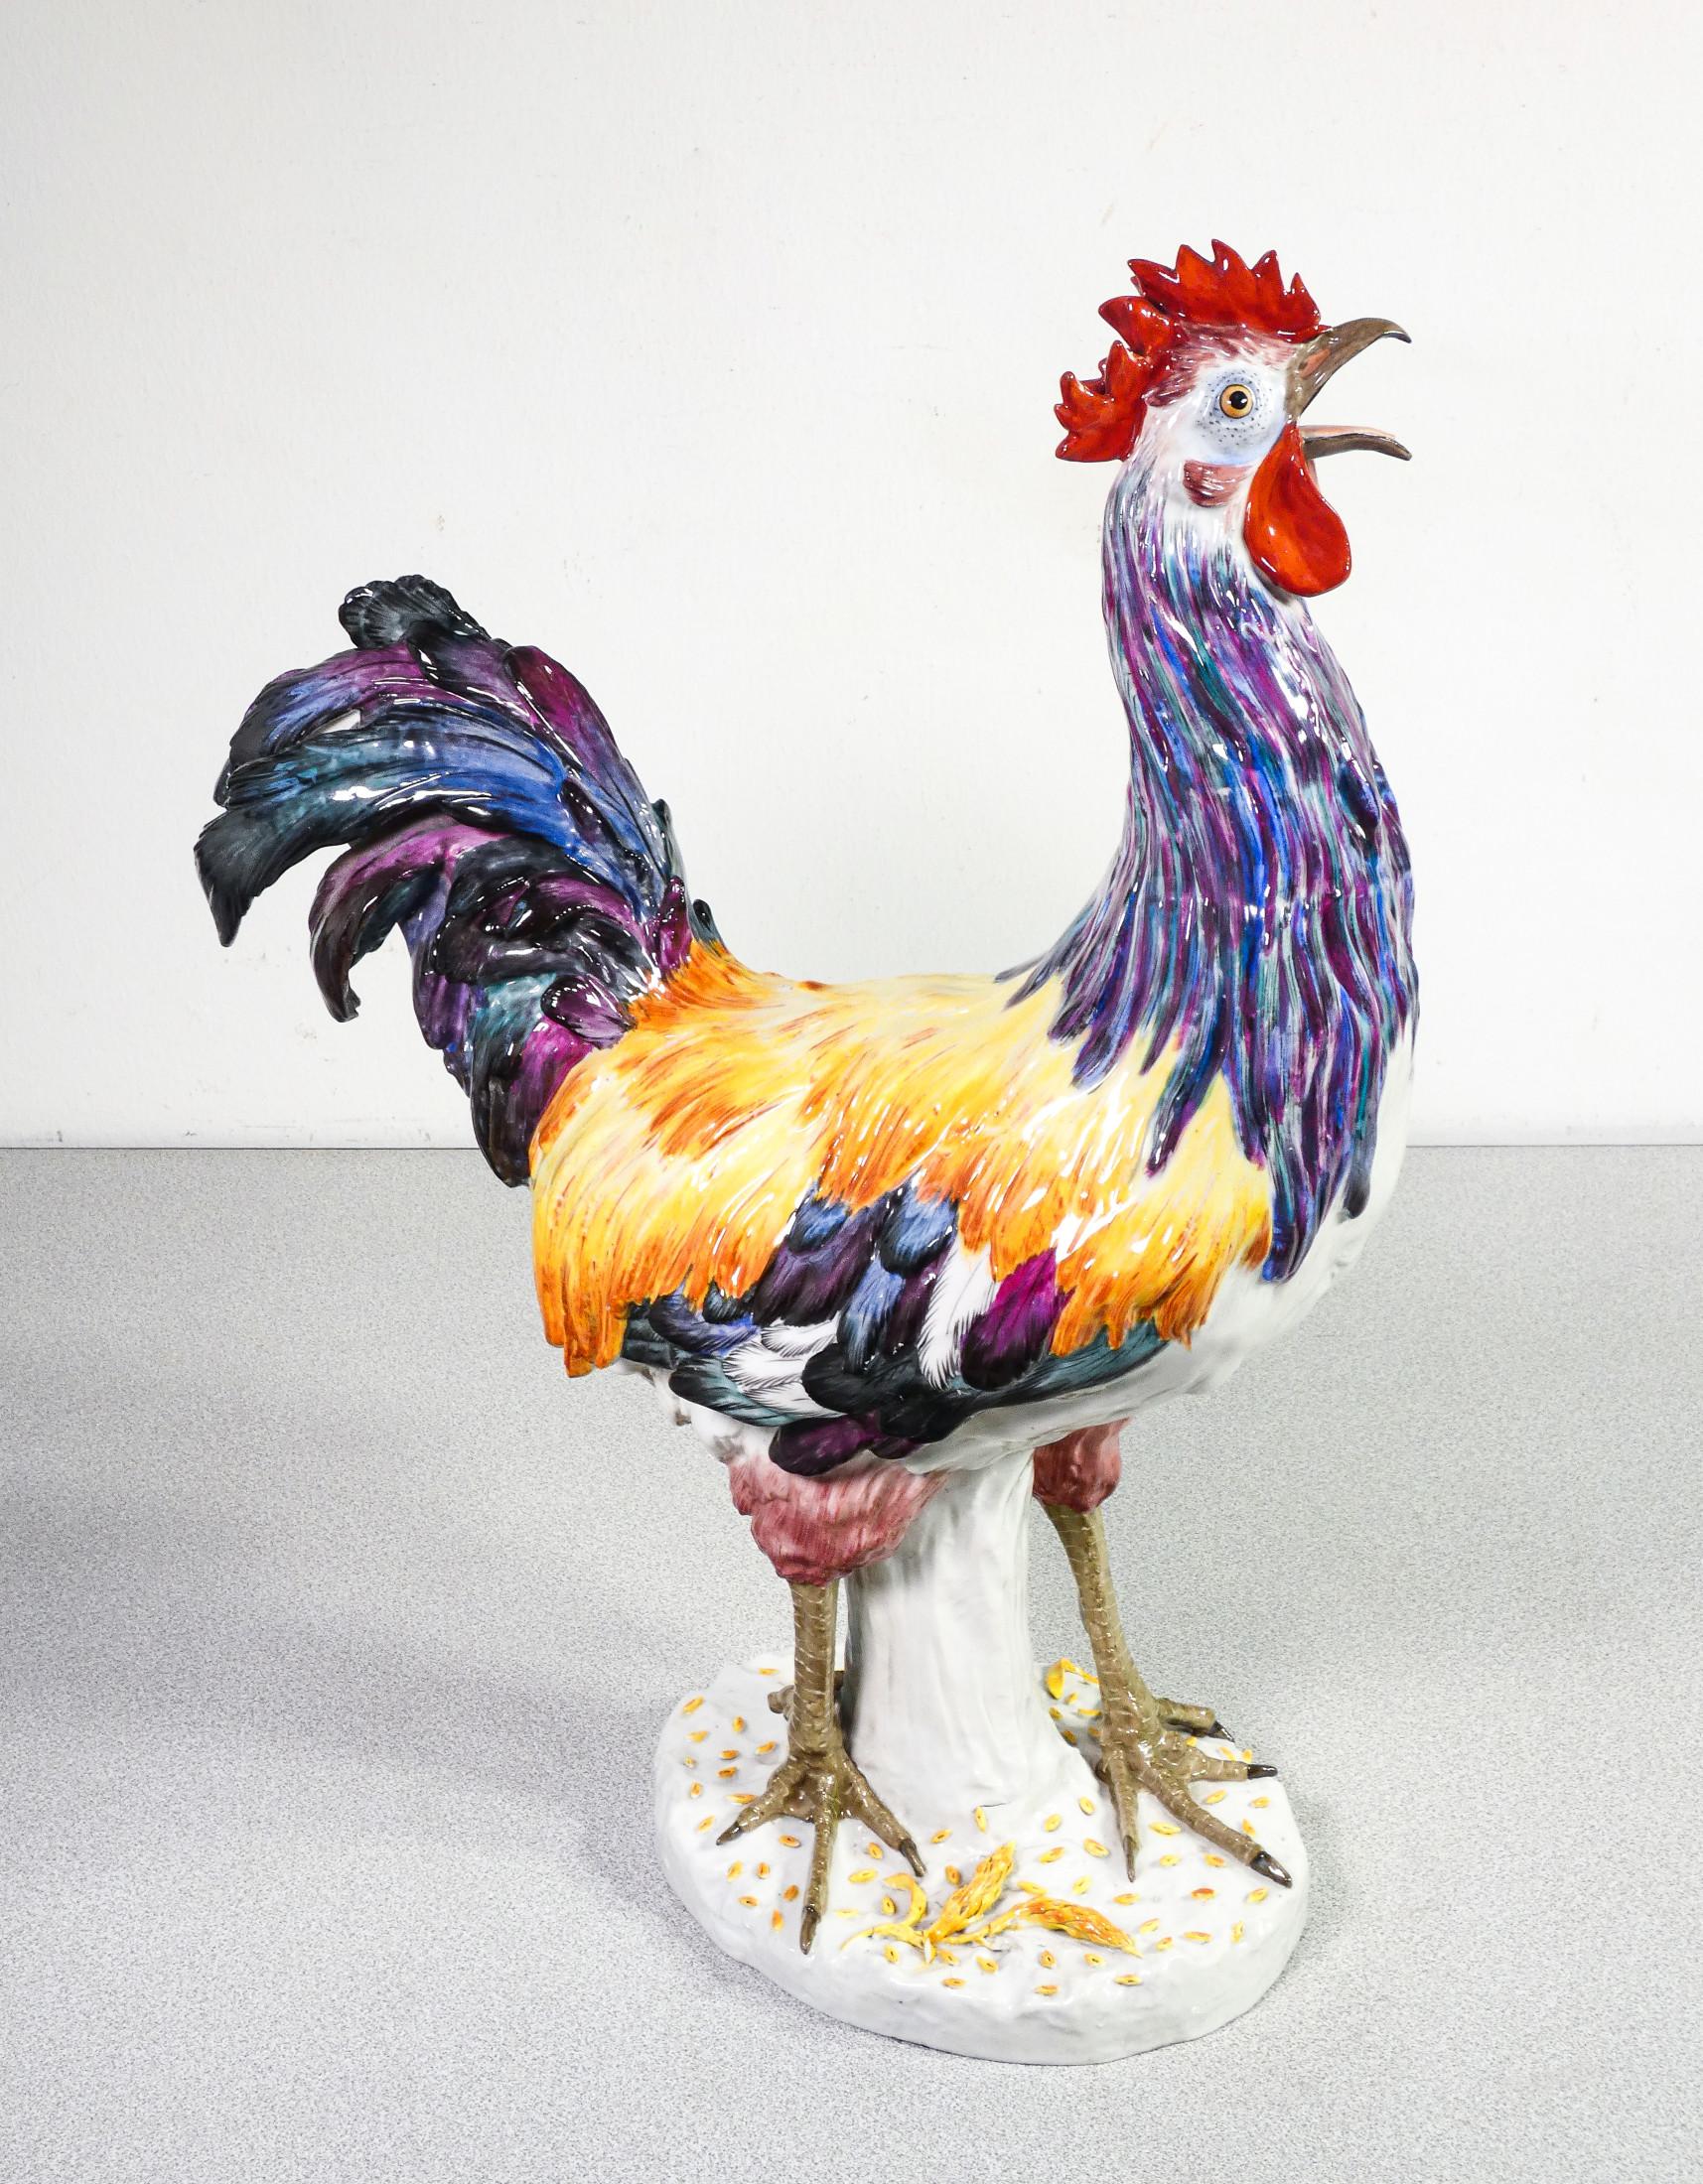 Ceramic sculpture
Rooster,
by Kalk Porcelain factory

Origin 
Germany

Period
Early 20th century

Brand
KALK Porcelain factory

Model
Rooster

Material
Hand modeled and painted porcelain

Dimensions
H 49 cm
37 x 15